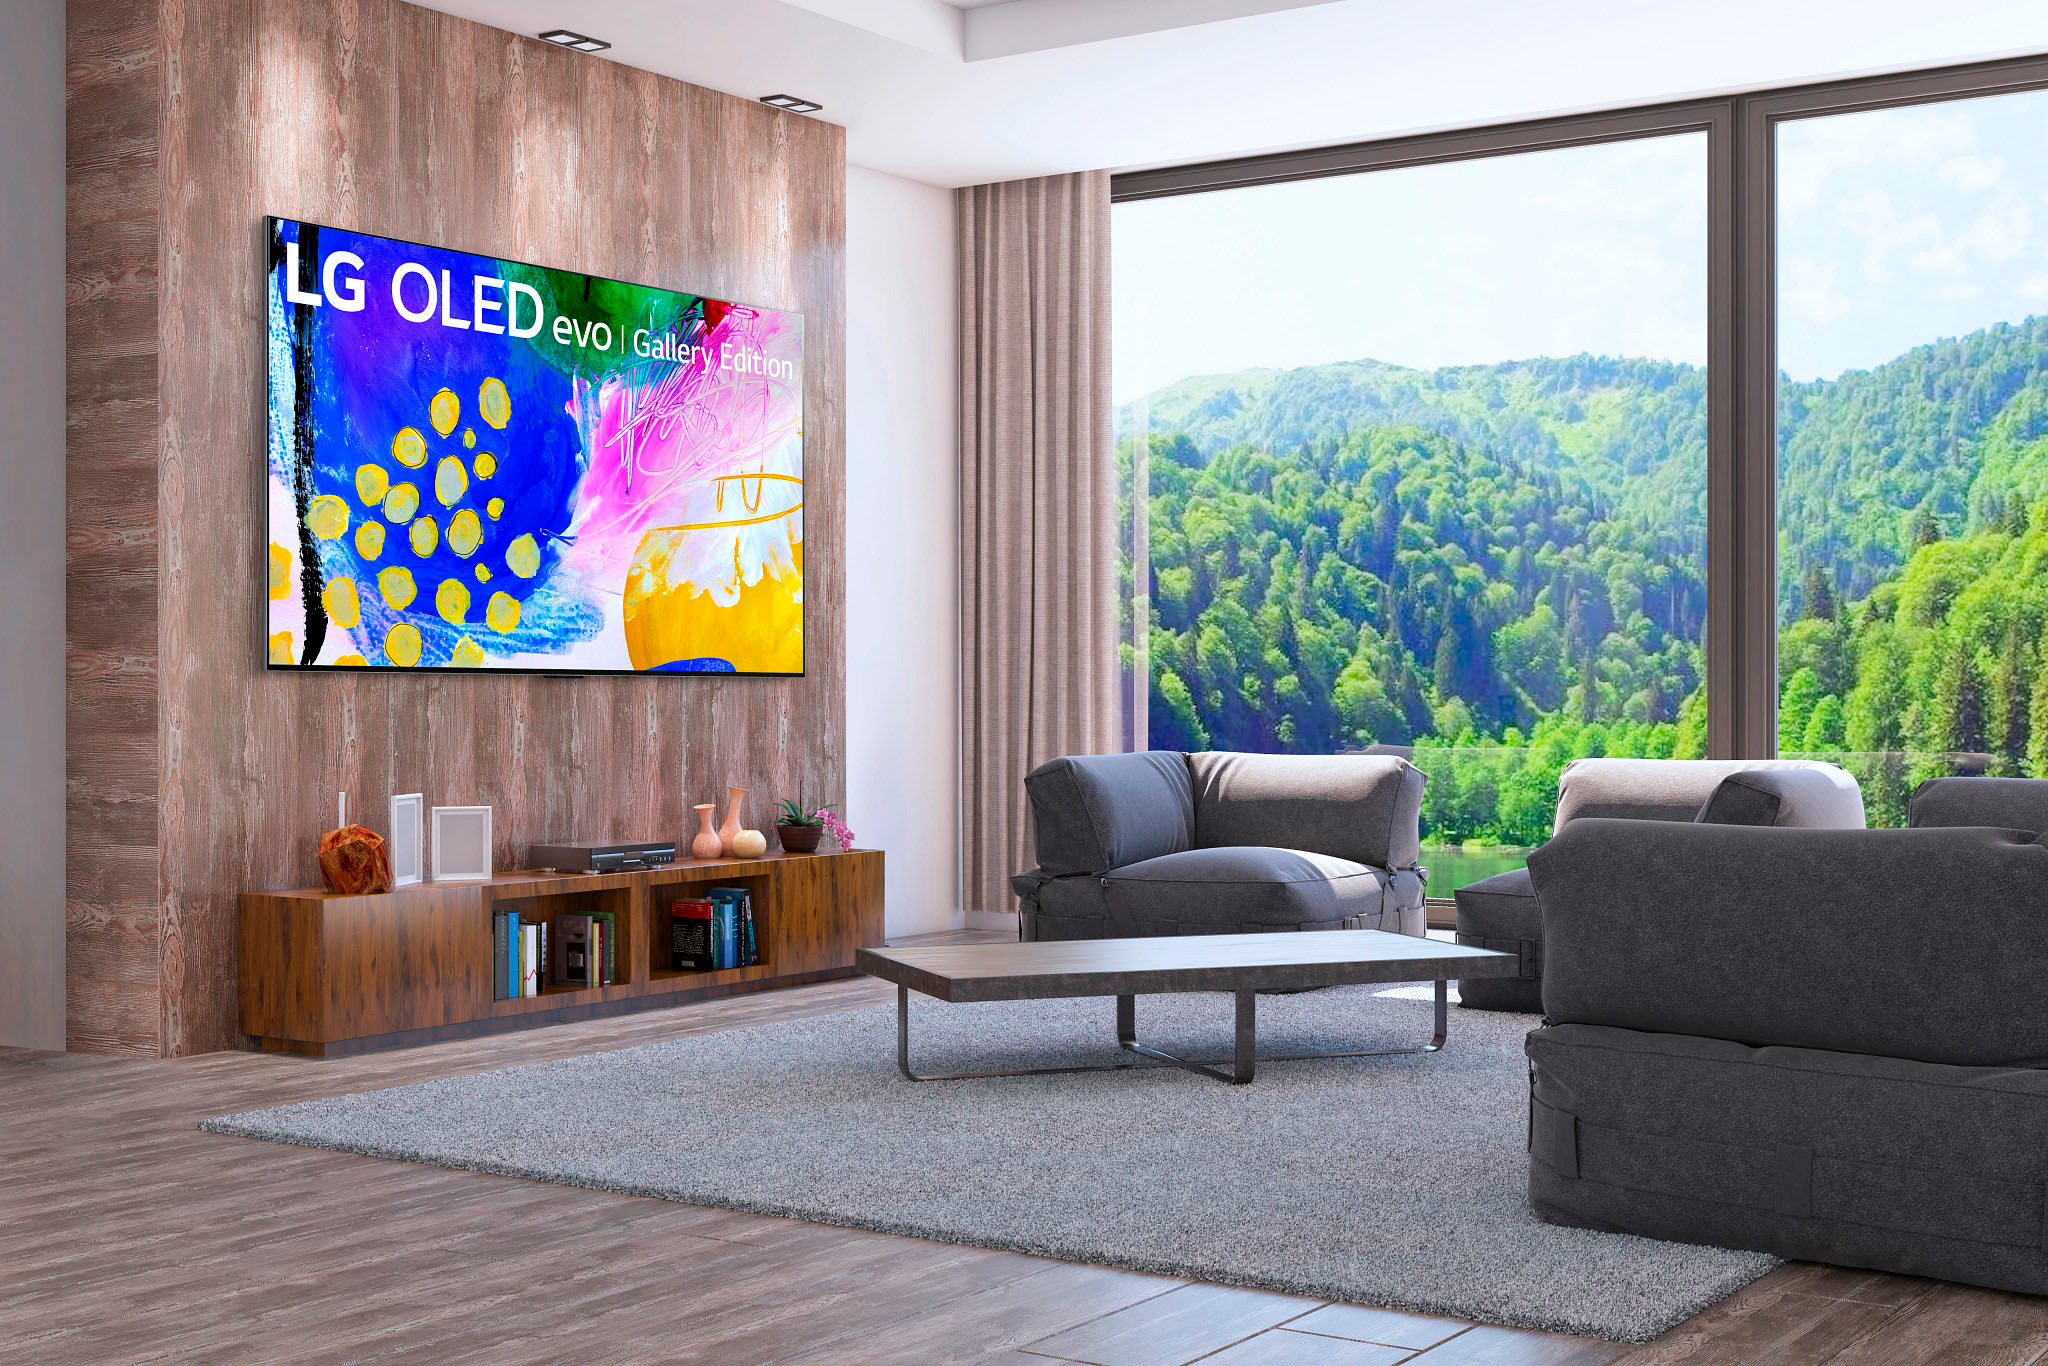 LG's Wireless 97-Inch OLED TV Is Full of Surprises - CNET